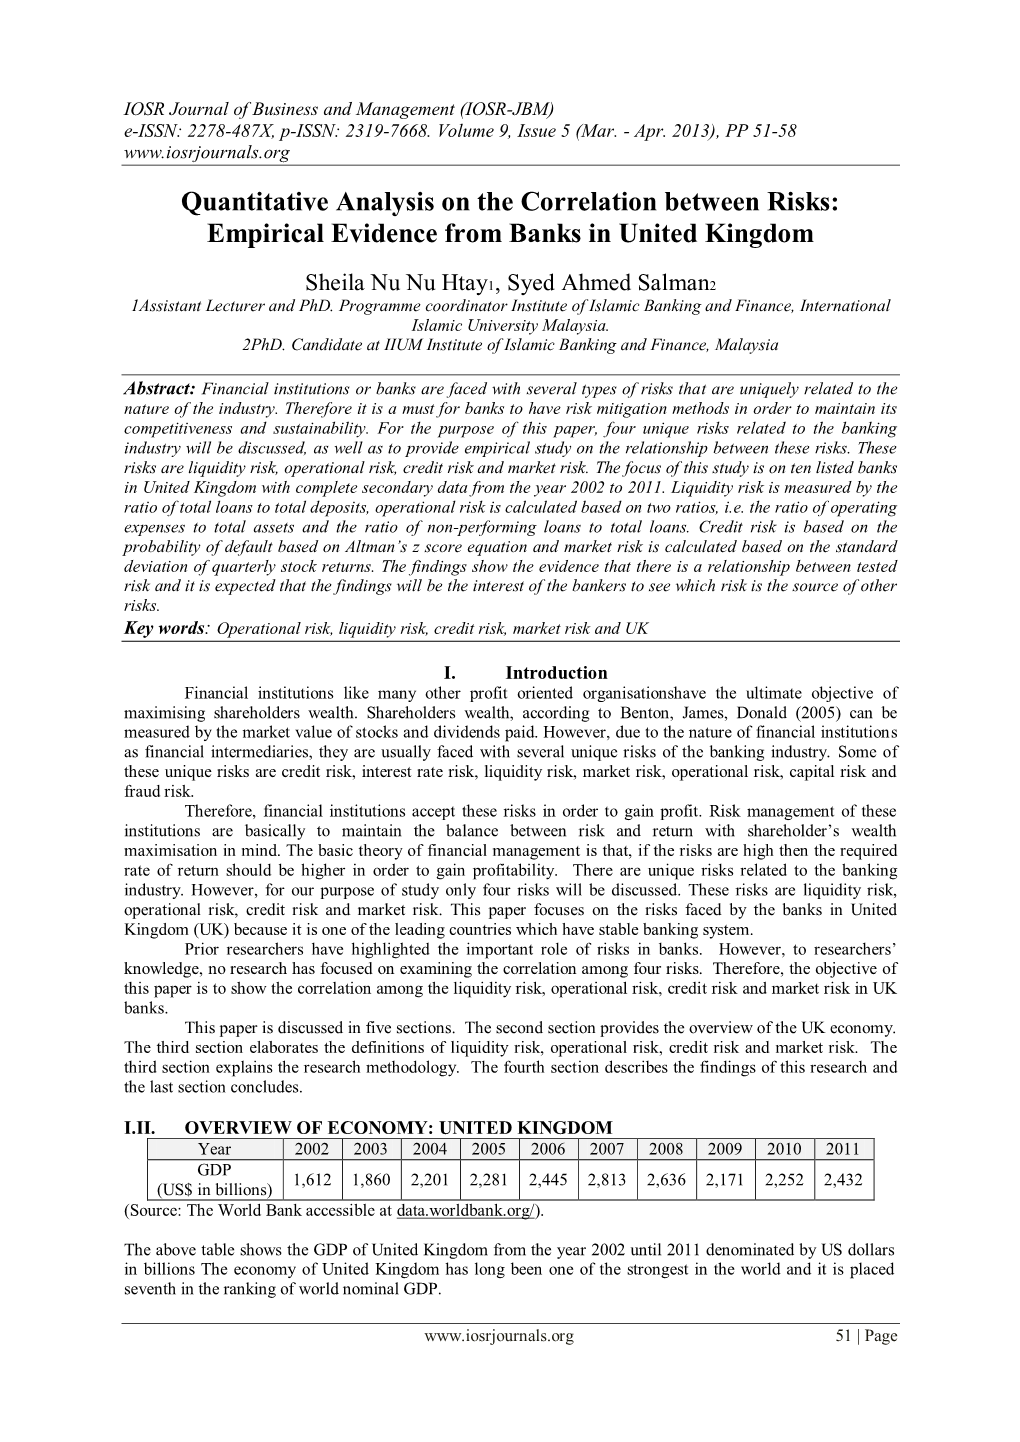 Quantitative Analysis on the Correlation Between Risks: Empirical Evidence from Banks in United Kingdom